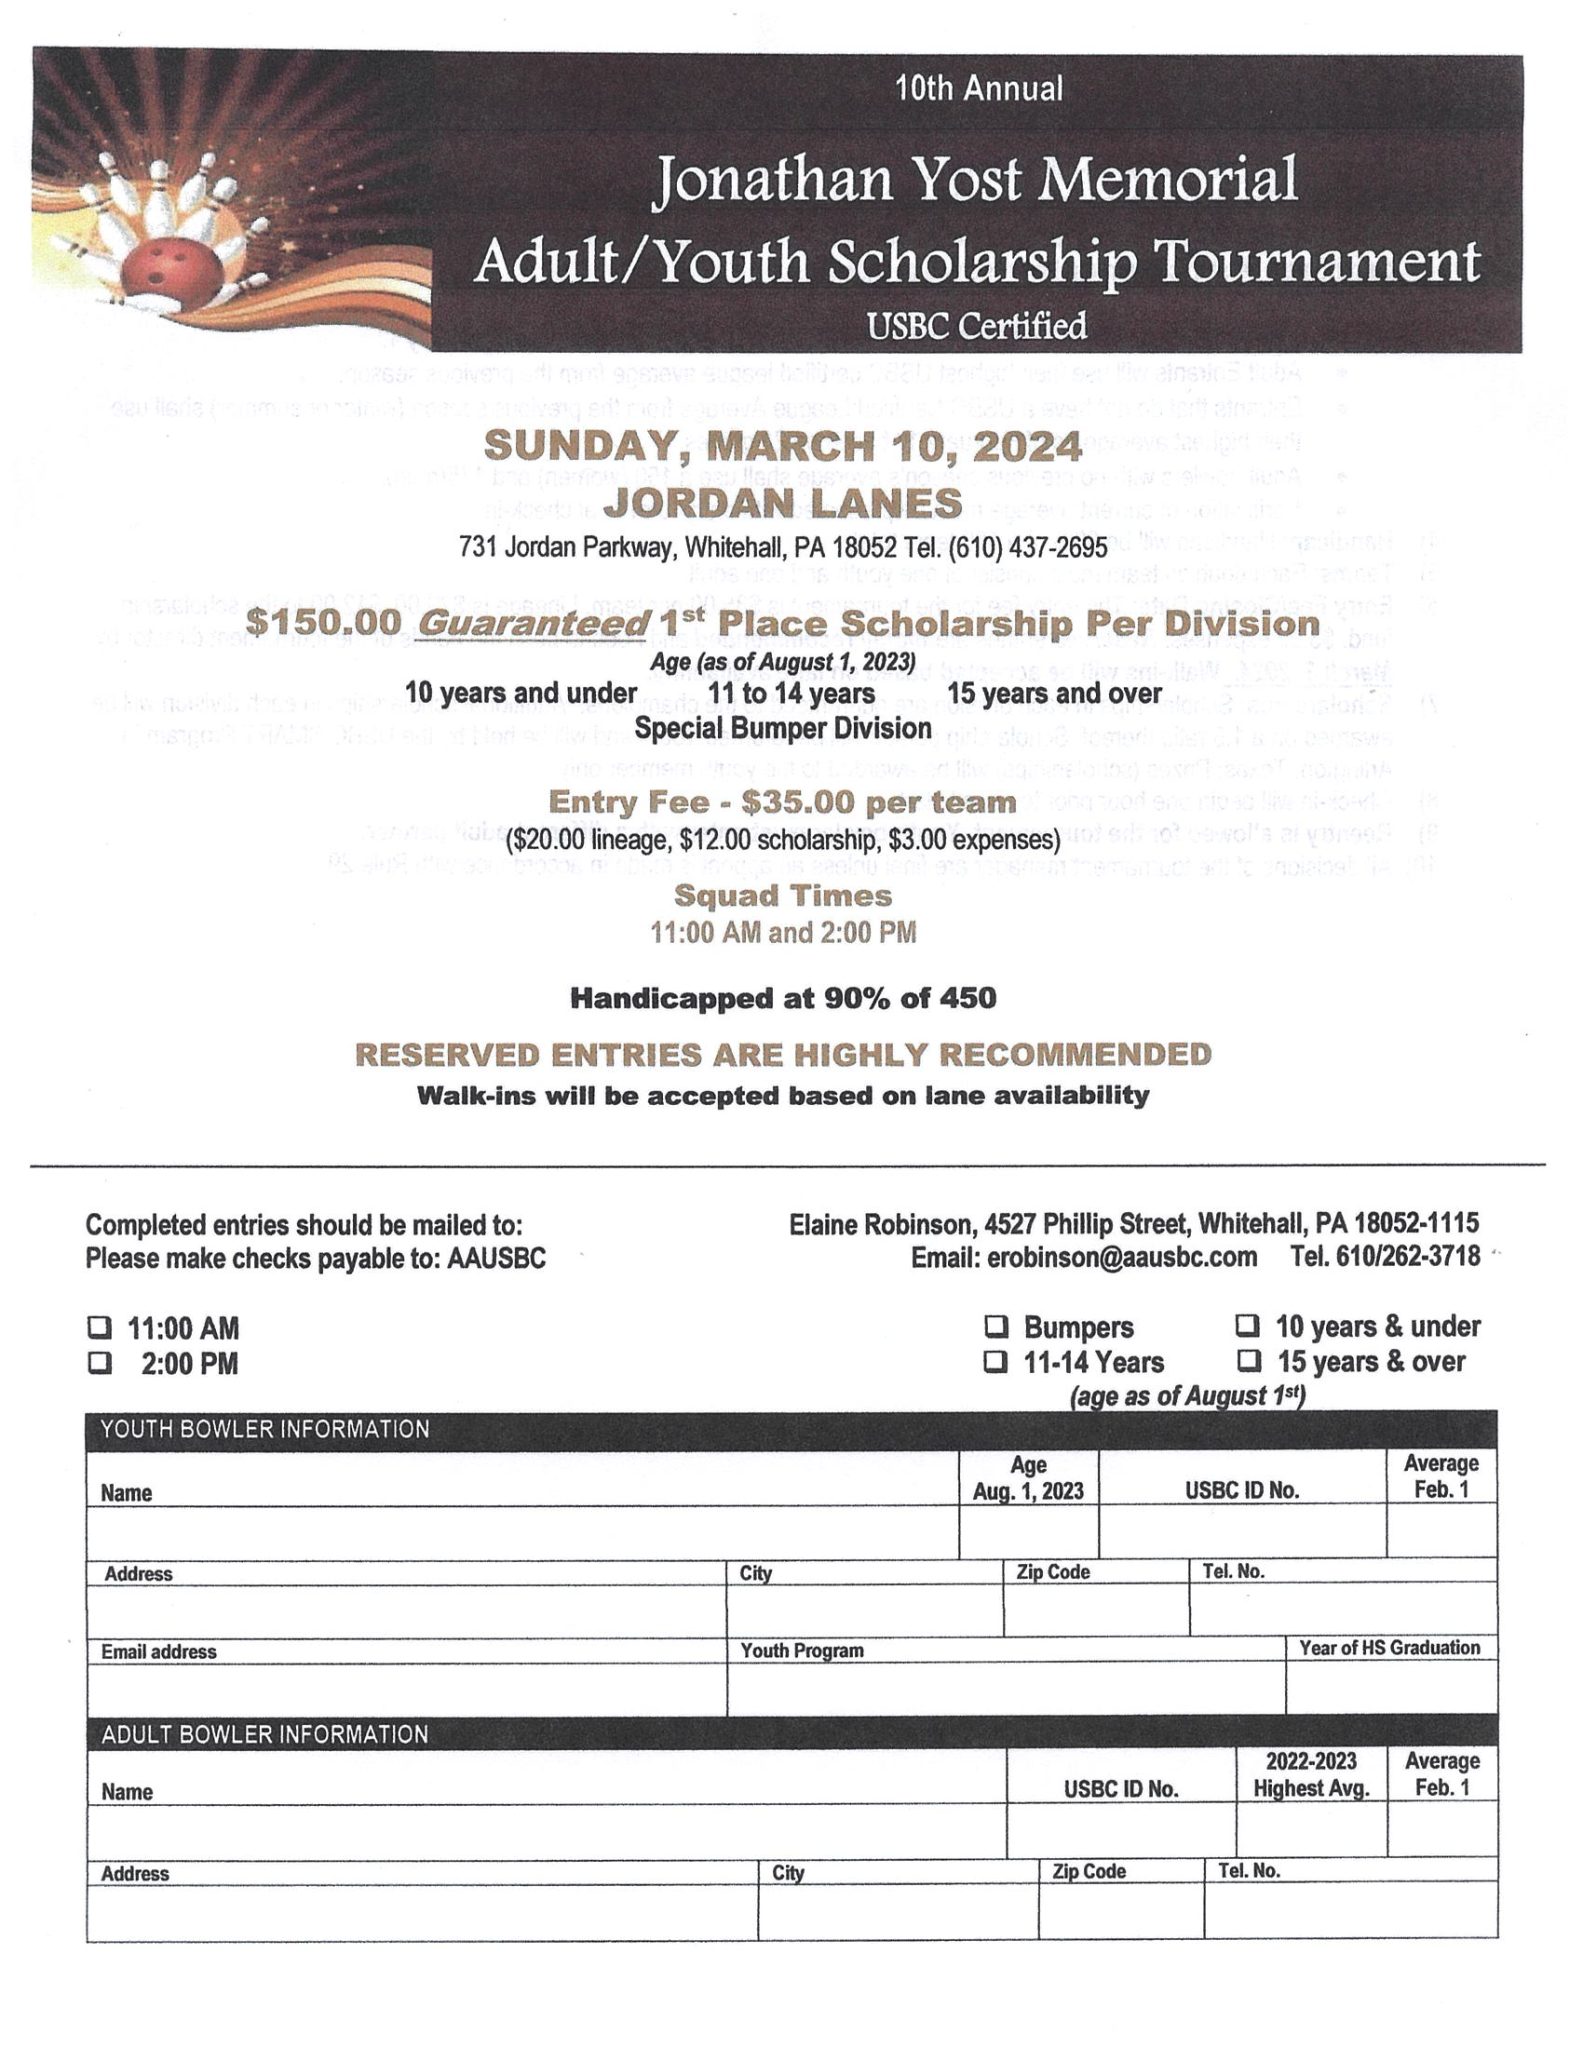 10th Annual Jonathan Yost Memorial Adult / Youth Scholarship Tournament 21